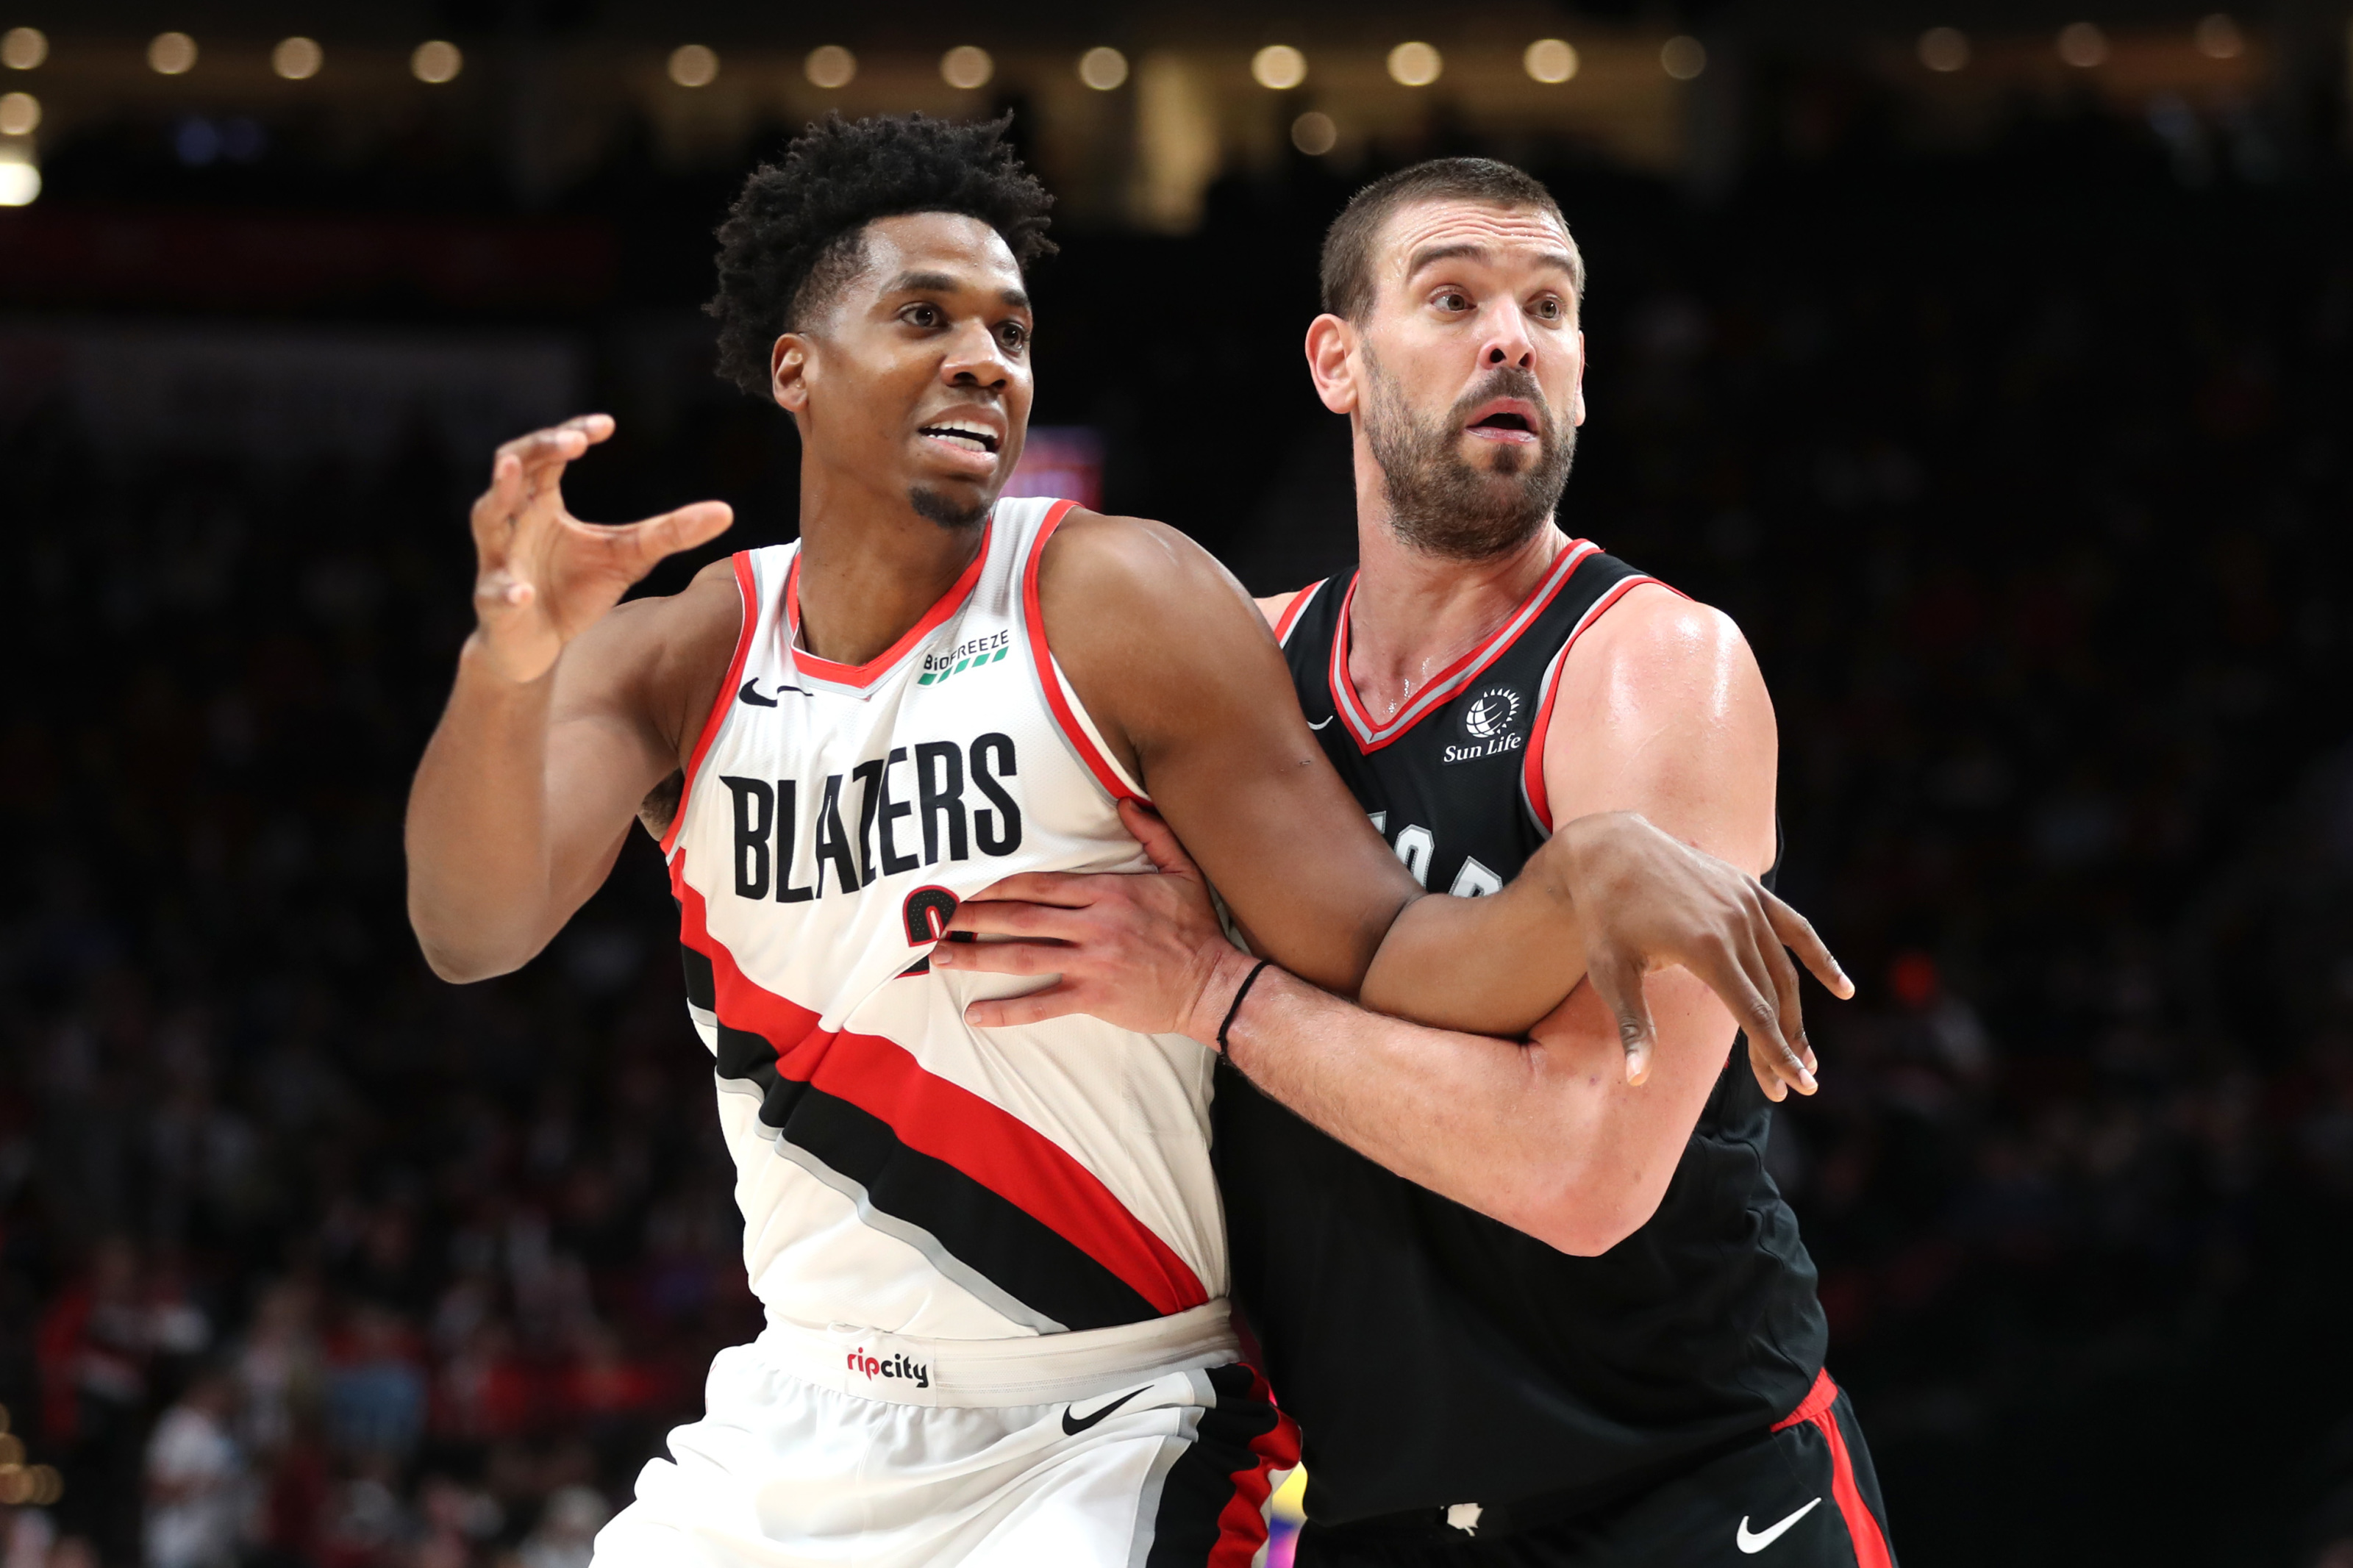 The NBA trade deadline, Hassan Whiteside and the Portland Trail